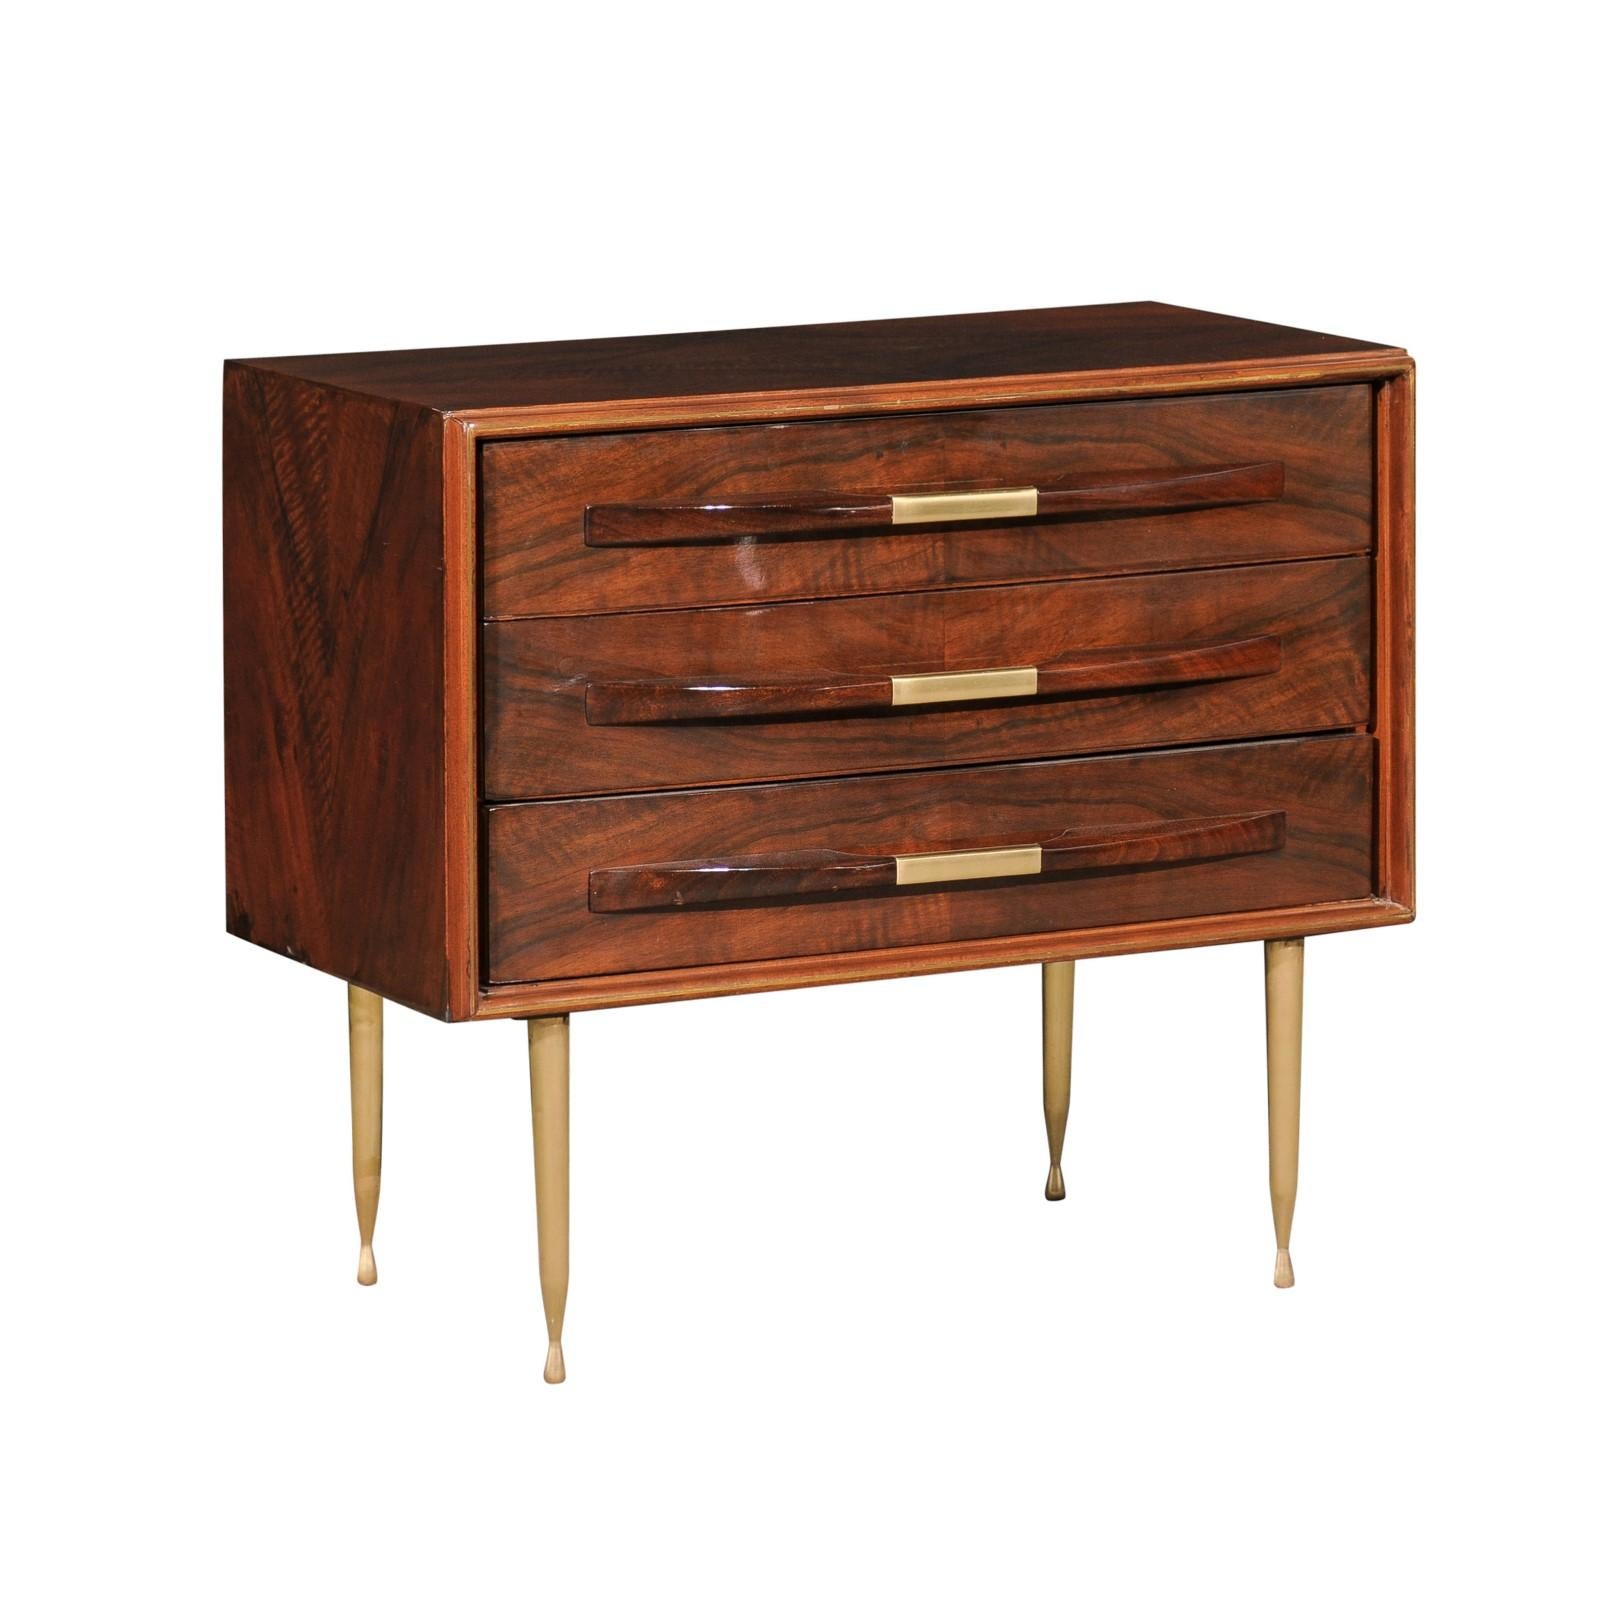 This magnificent commode is shipped as professionally photographed and described in the listing narrative: Meticulously professionally restored and completely installation ready. 

An exquisite modern bookmatch walnut and brass commode, Italy, circa